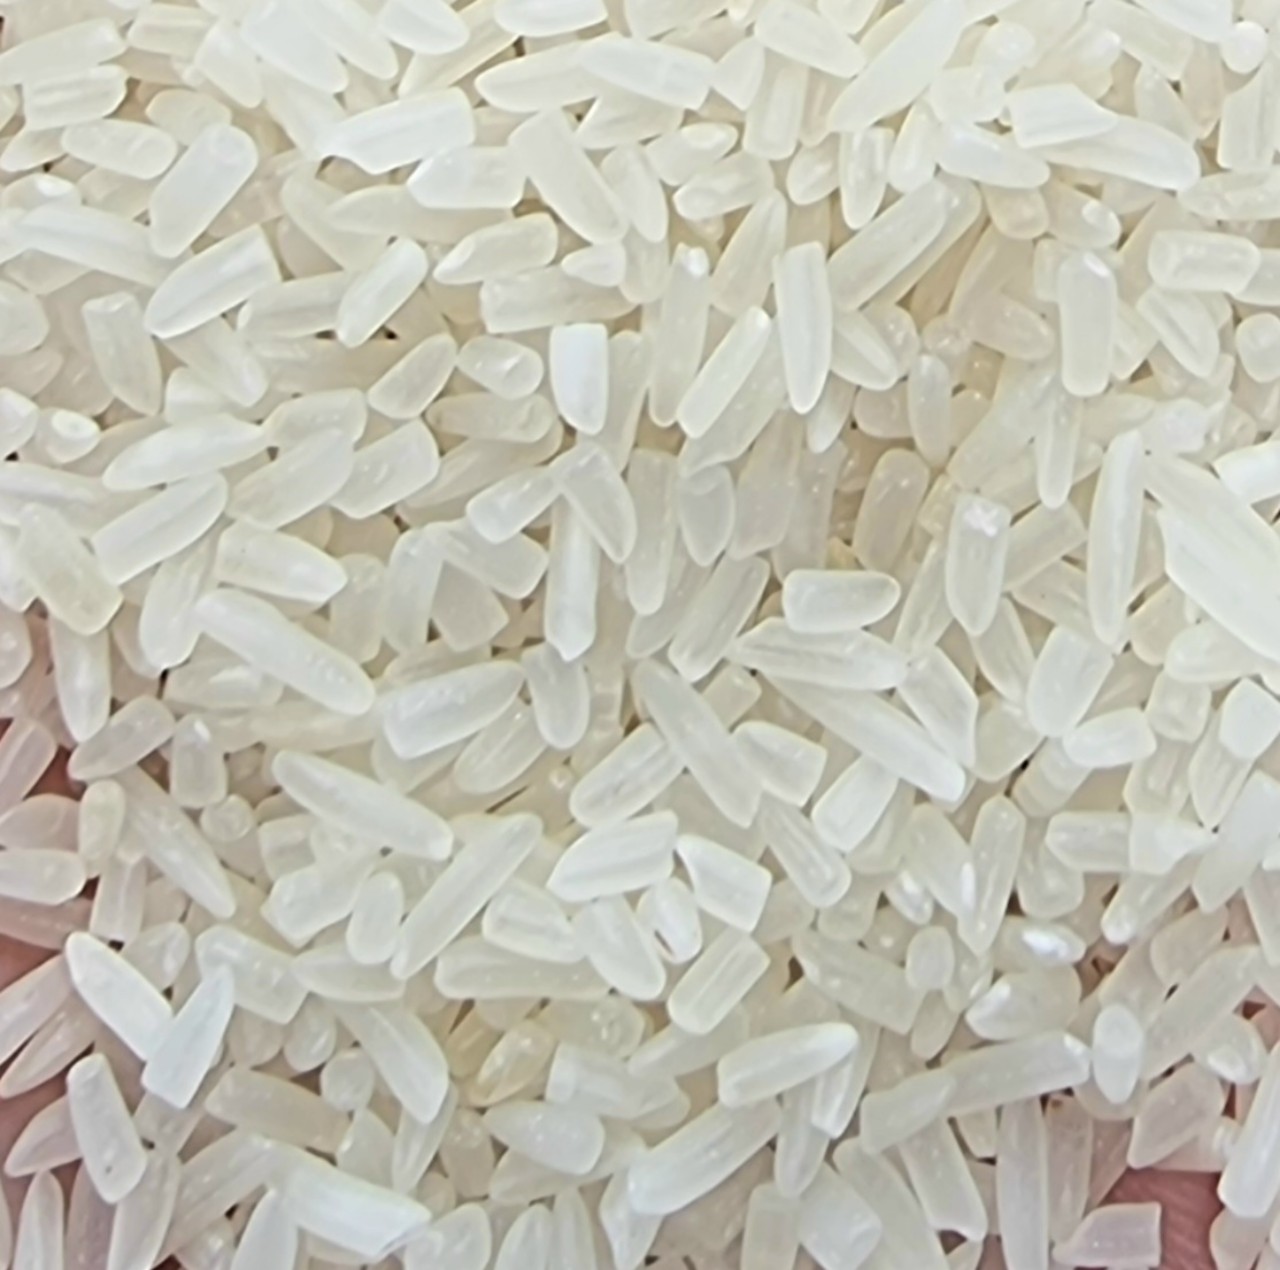 Vietnam Rice 100 Percent Broken Best Selling Common Cultivation Cooking Food HALAL BRCGS HACCP ISO 22000 Vacuum Customized Pack 4